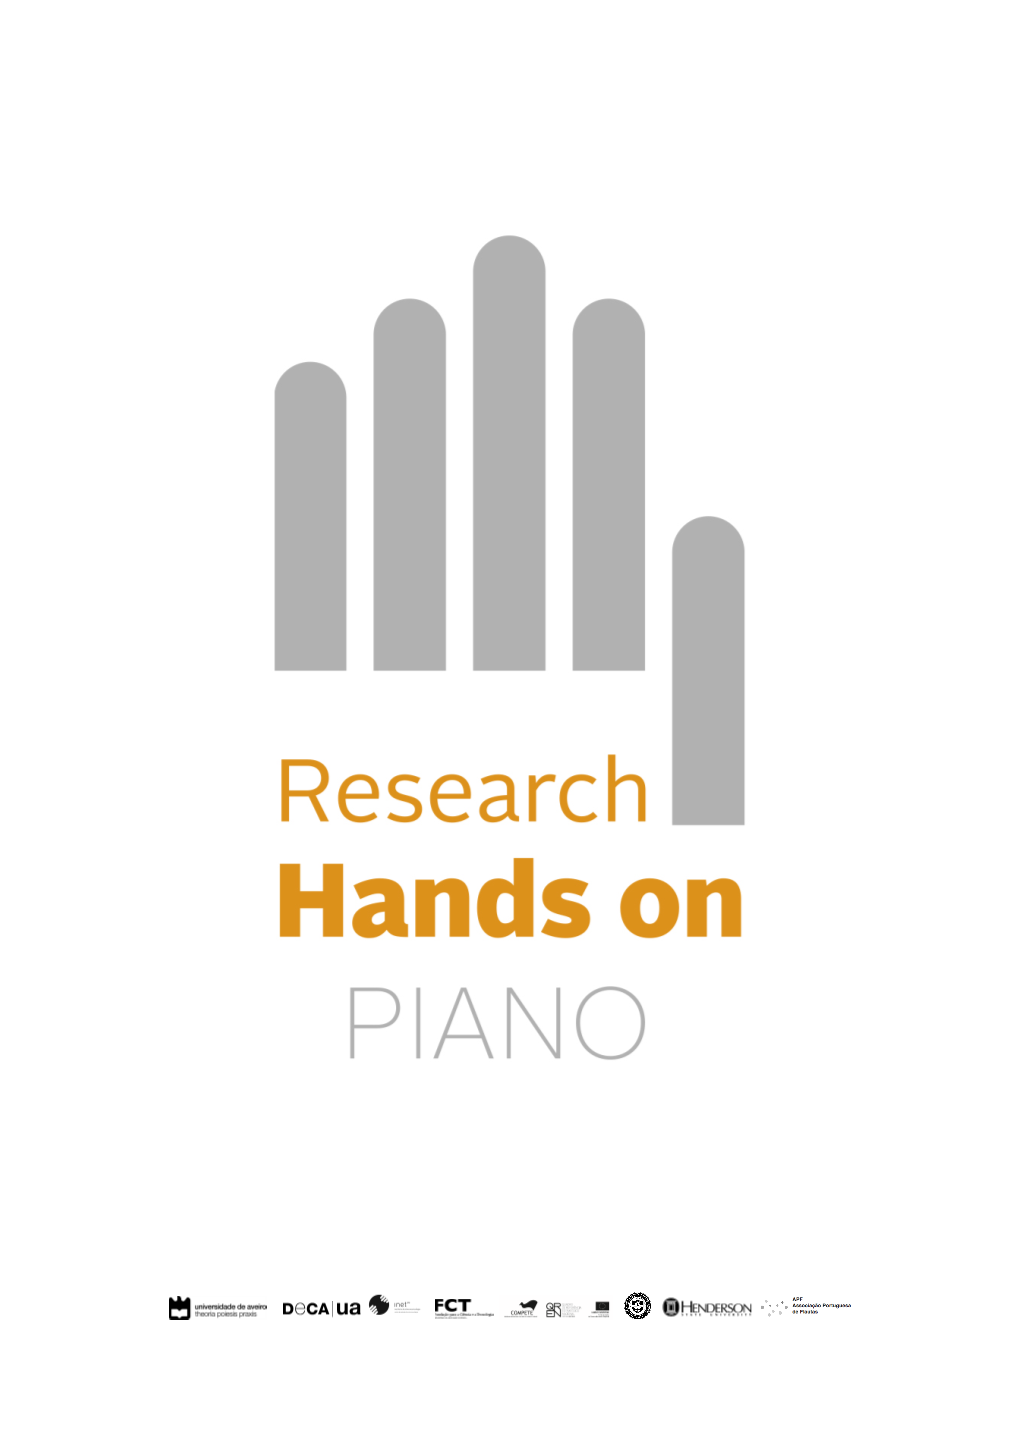 Hands on PIANO - International Conference on Music Performance